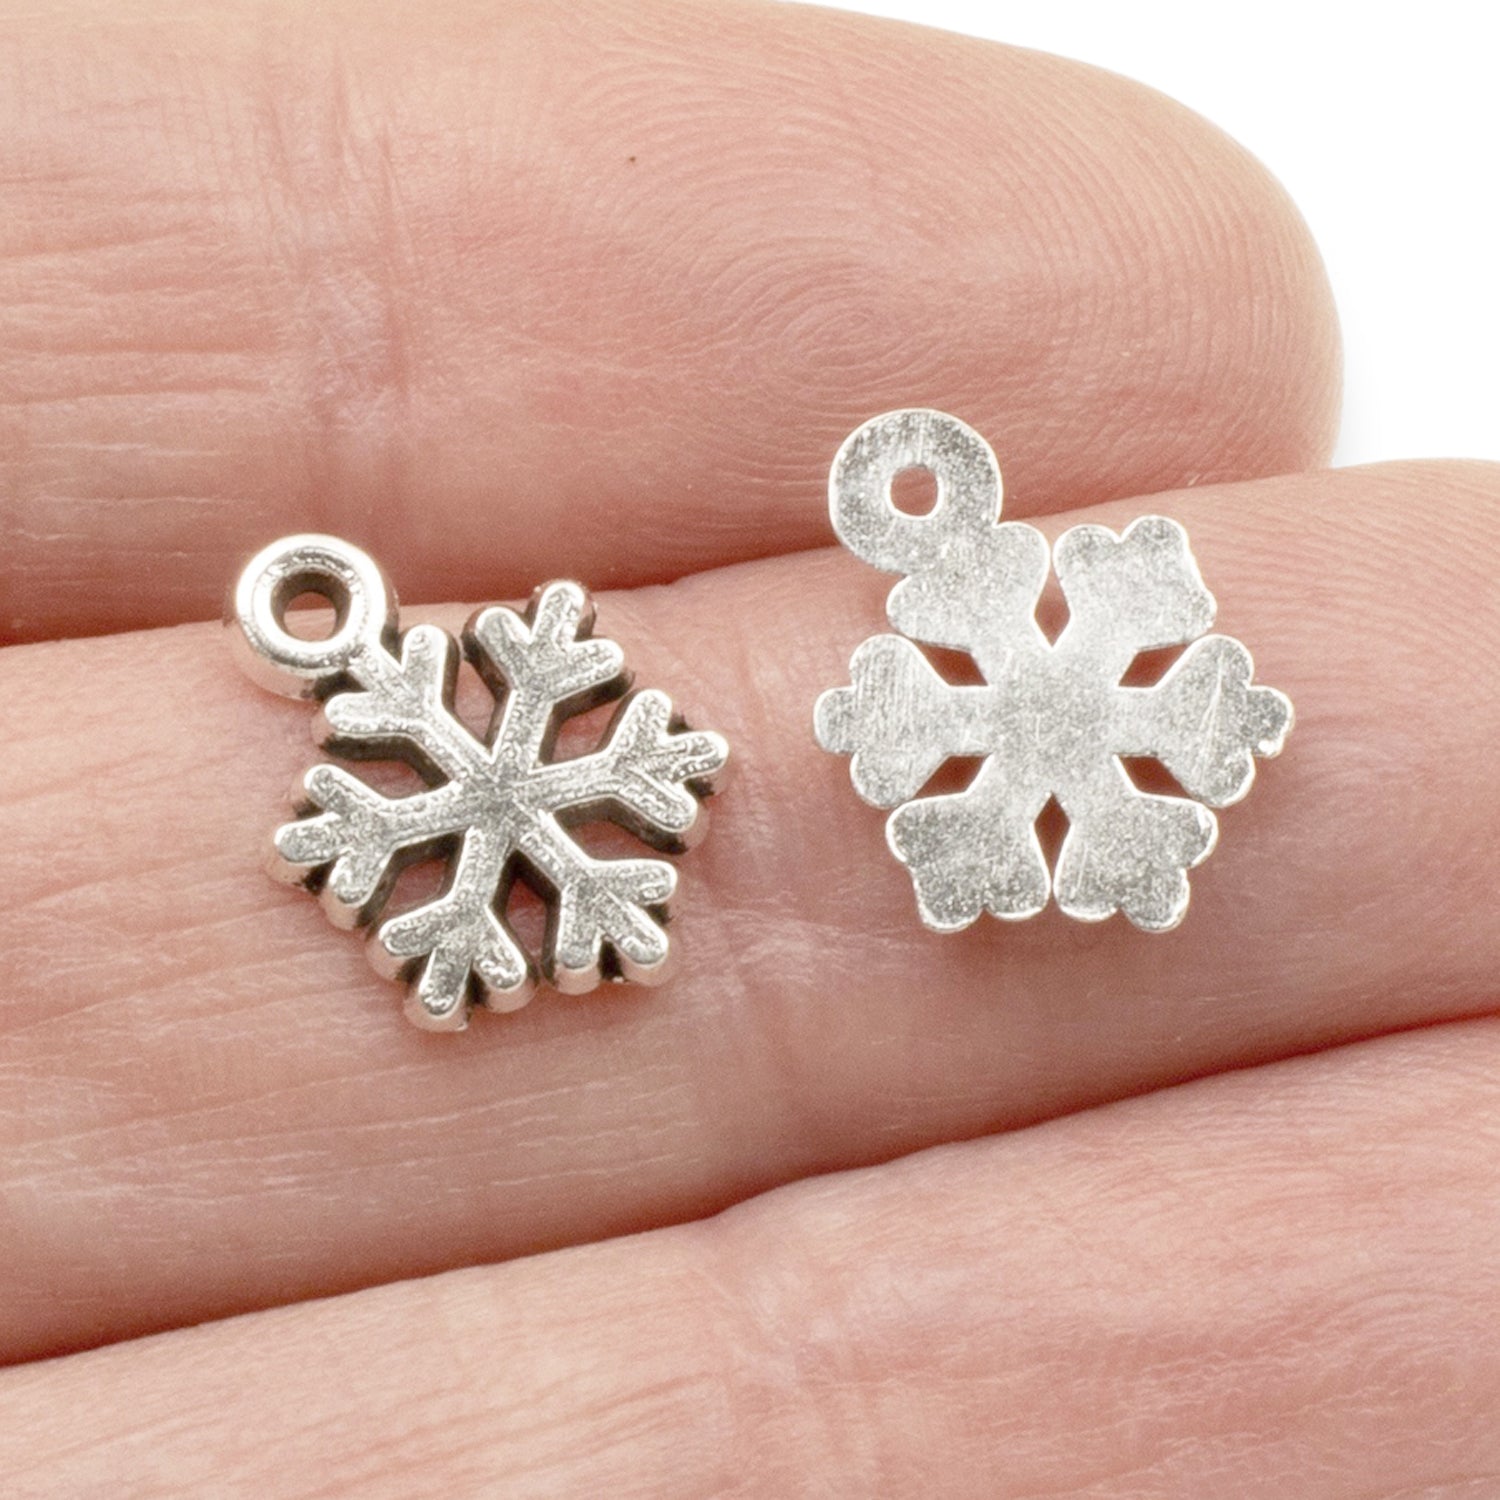 Silver Plated Snowflake Charms, Charms on Sale, Christmas Snowflake Beads,  Winter Charms, Silver Snowflake, Discount Charms 25mm 1100 